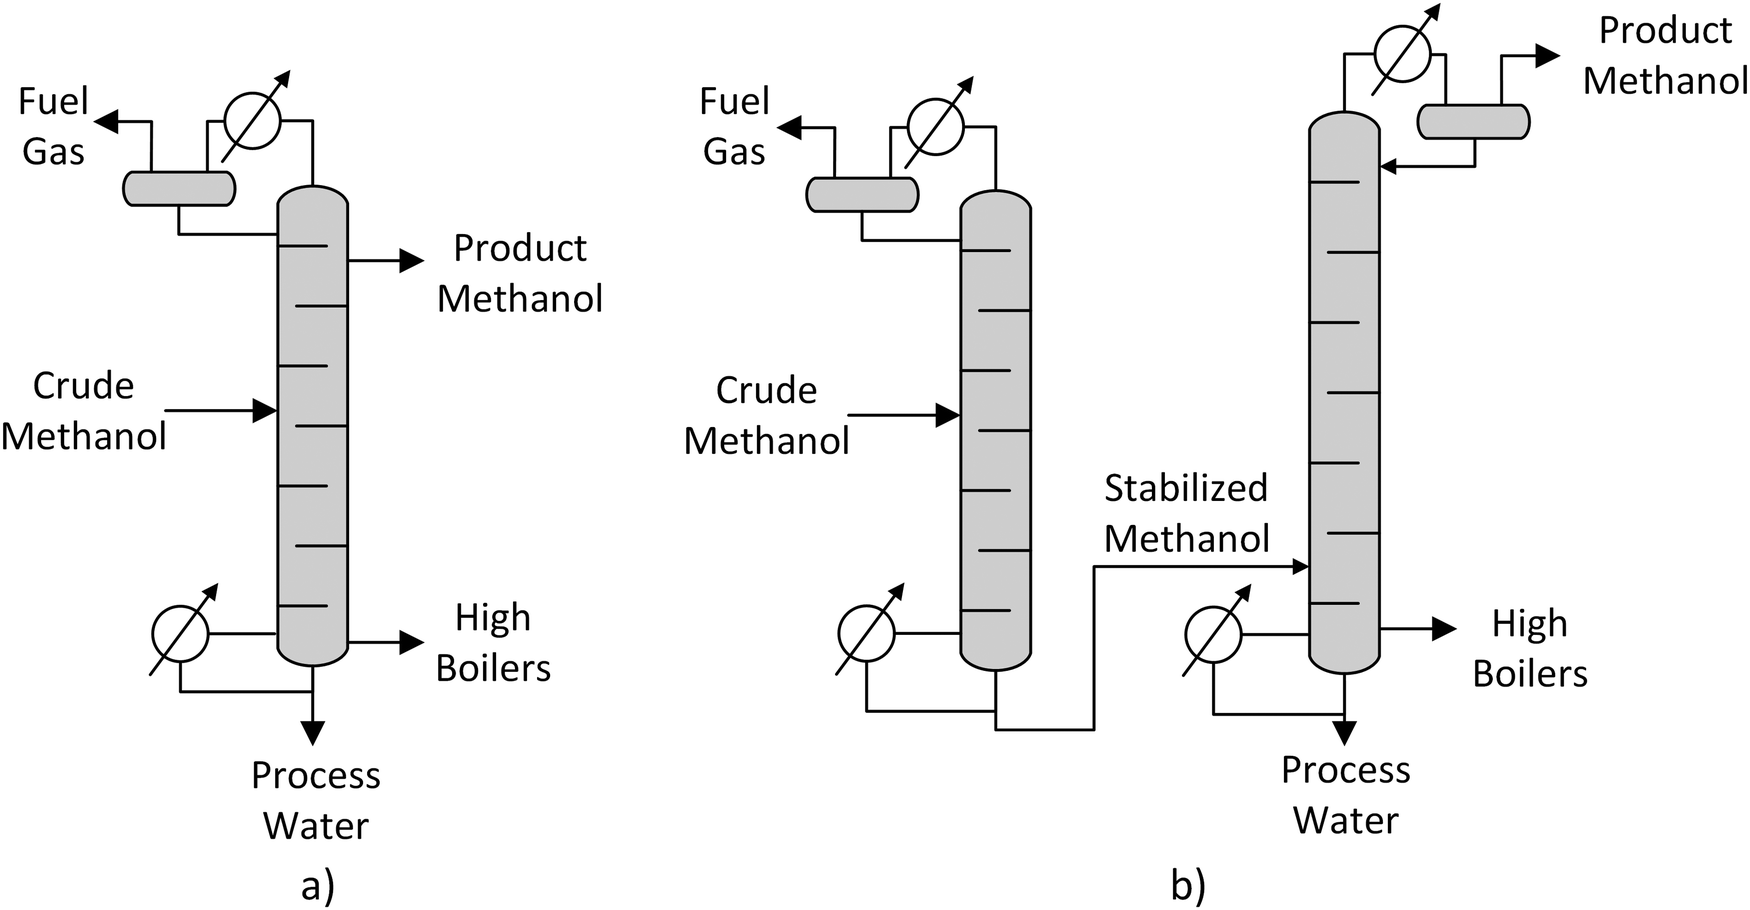 Power To Liquid Via Synthesis Of Methanol Dme Or Fischer Tropsch Fuels A Review Energy Environmental Science Rsc Publishing Doi 10 1039 D0eeh